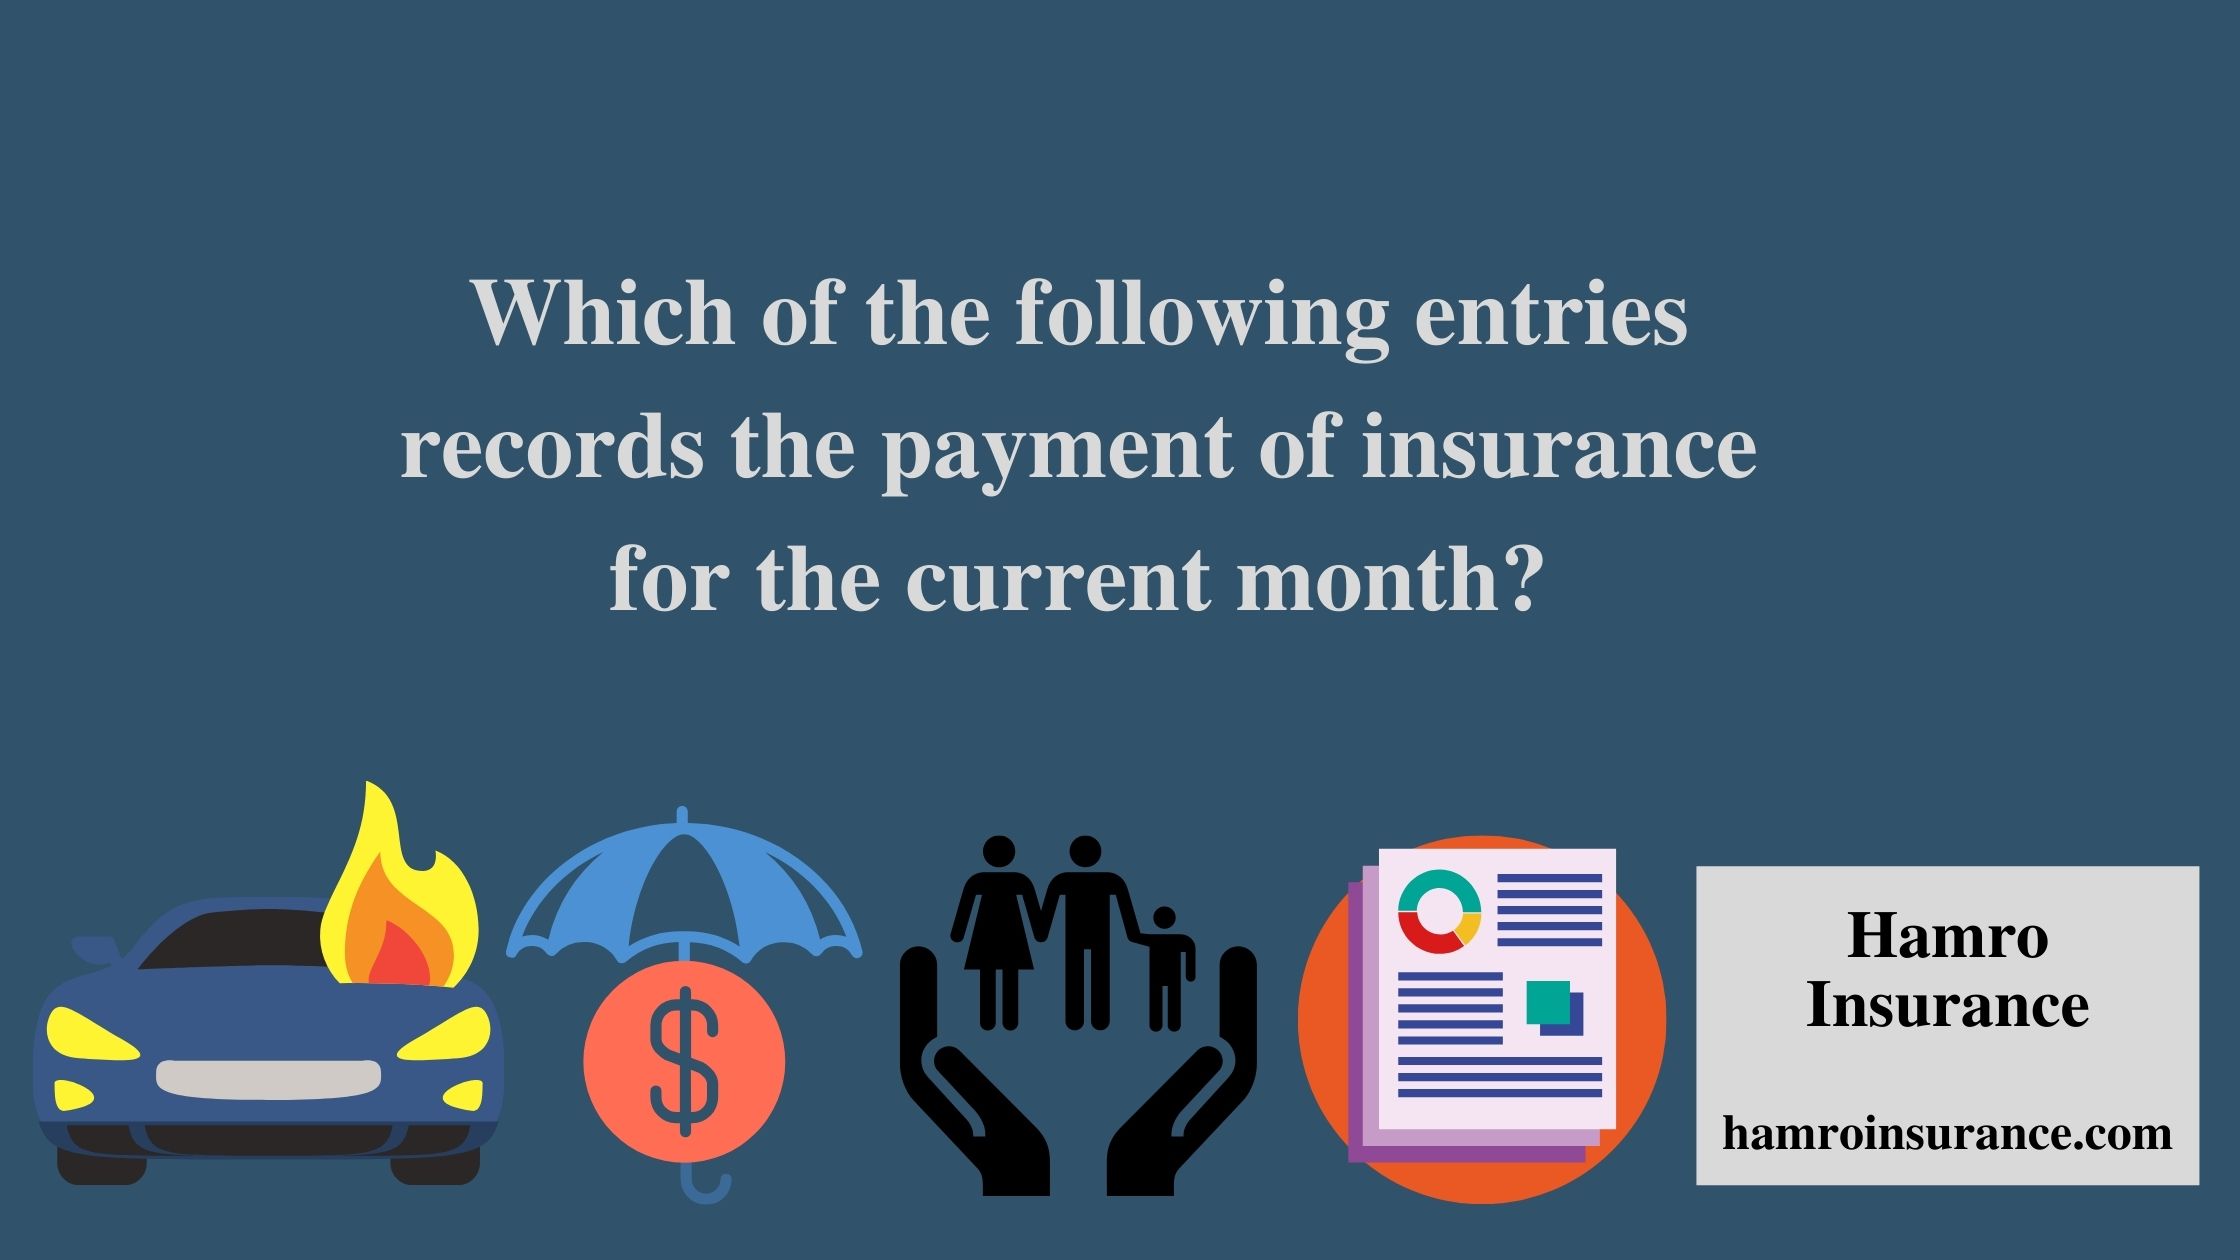 Which of the following entries records the payment of insurance for the current month?